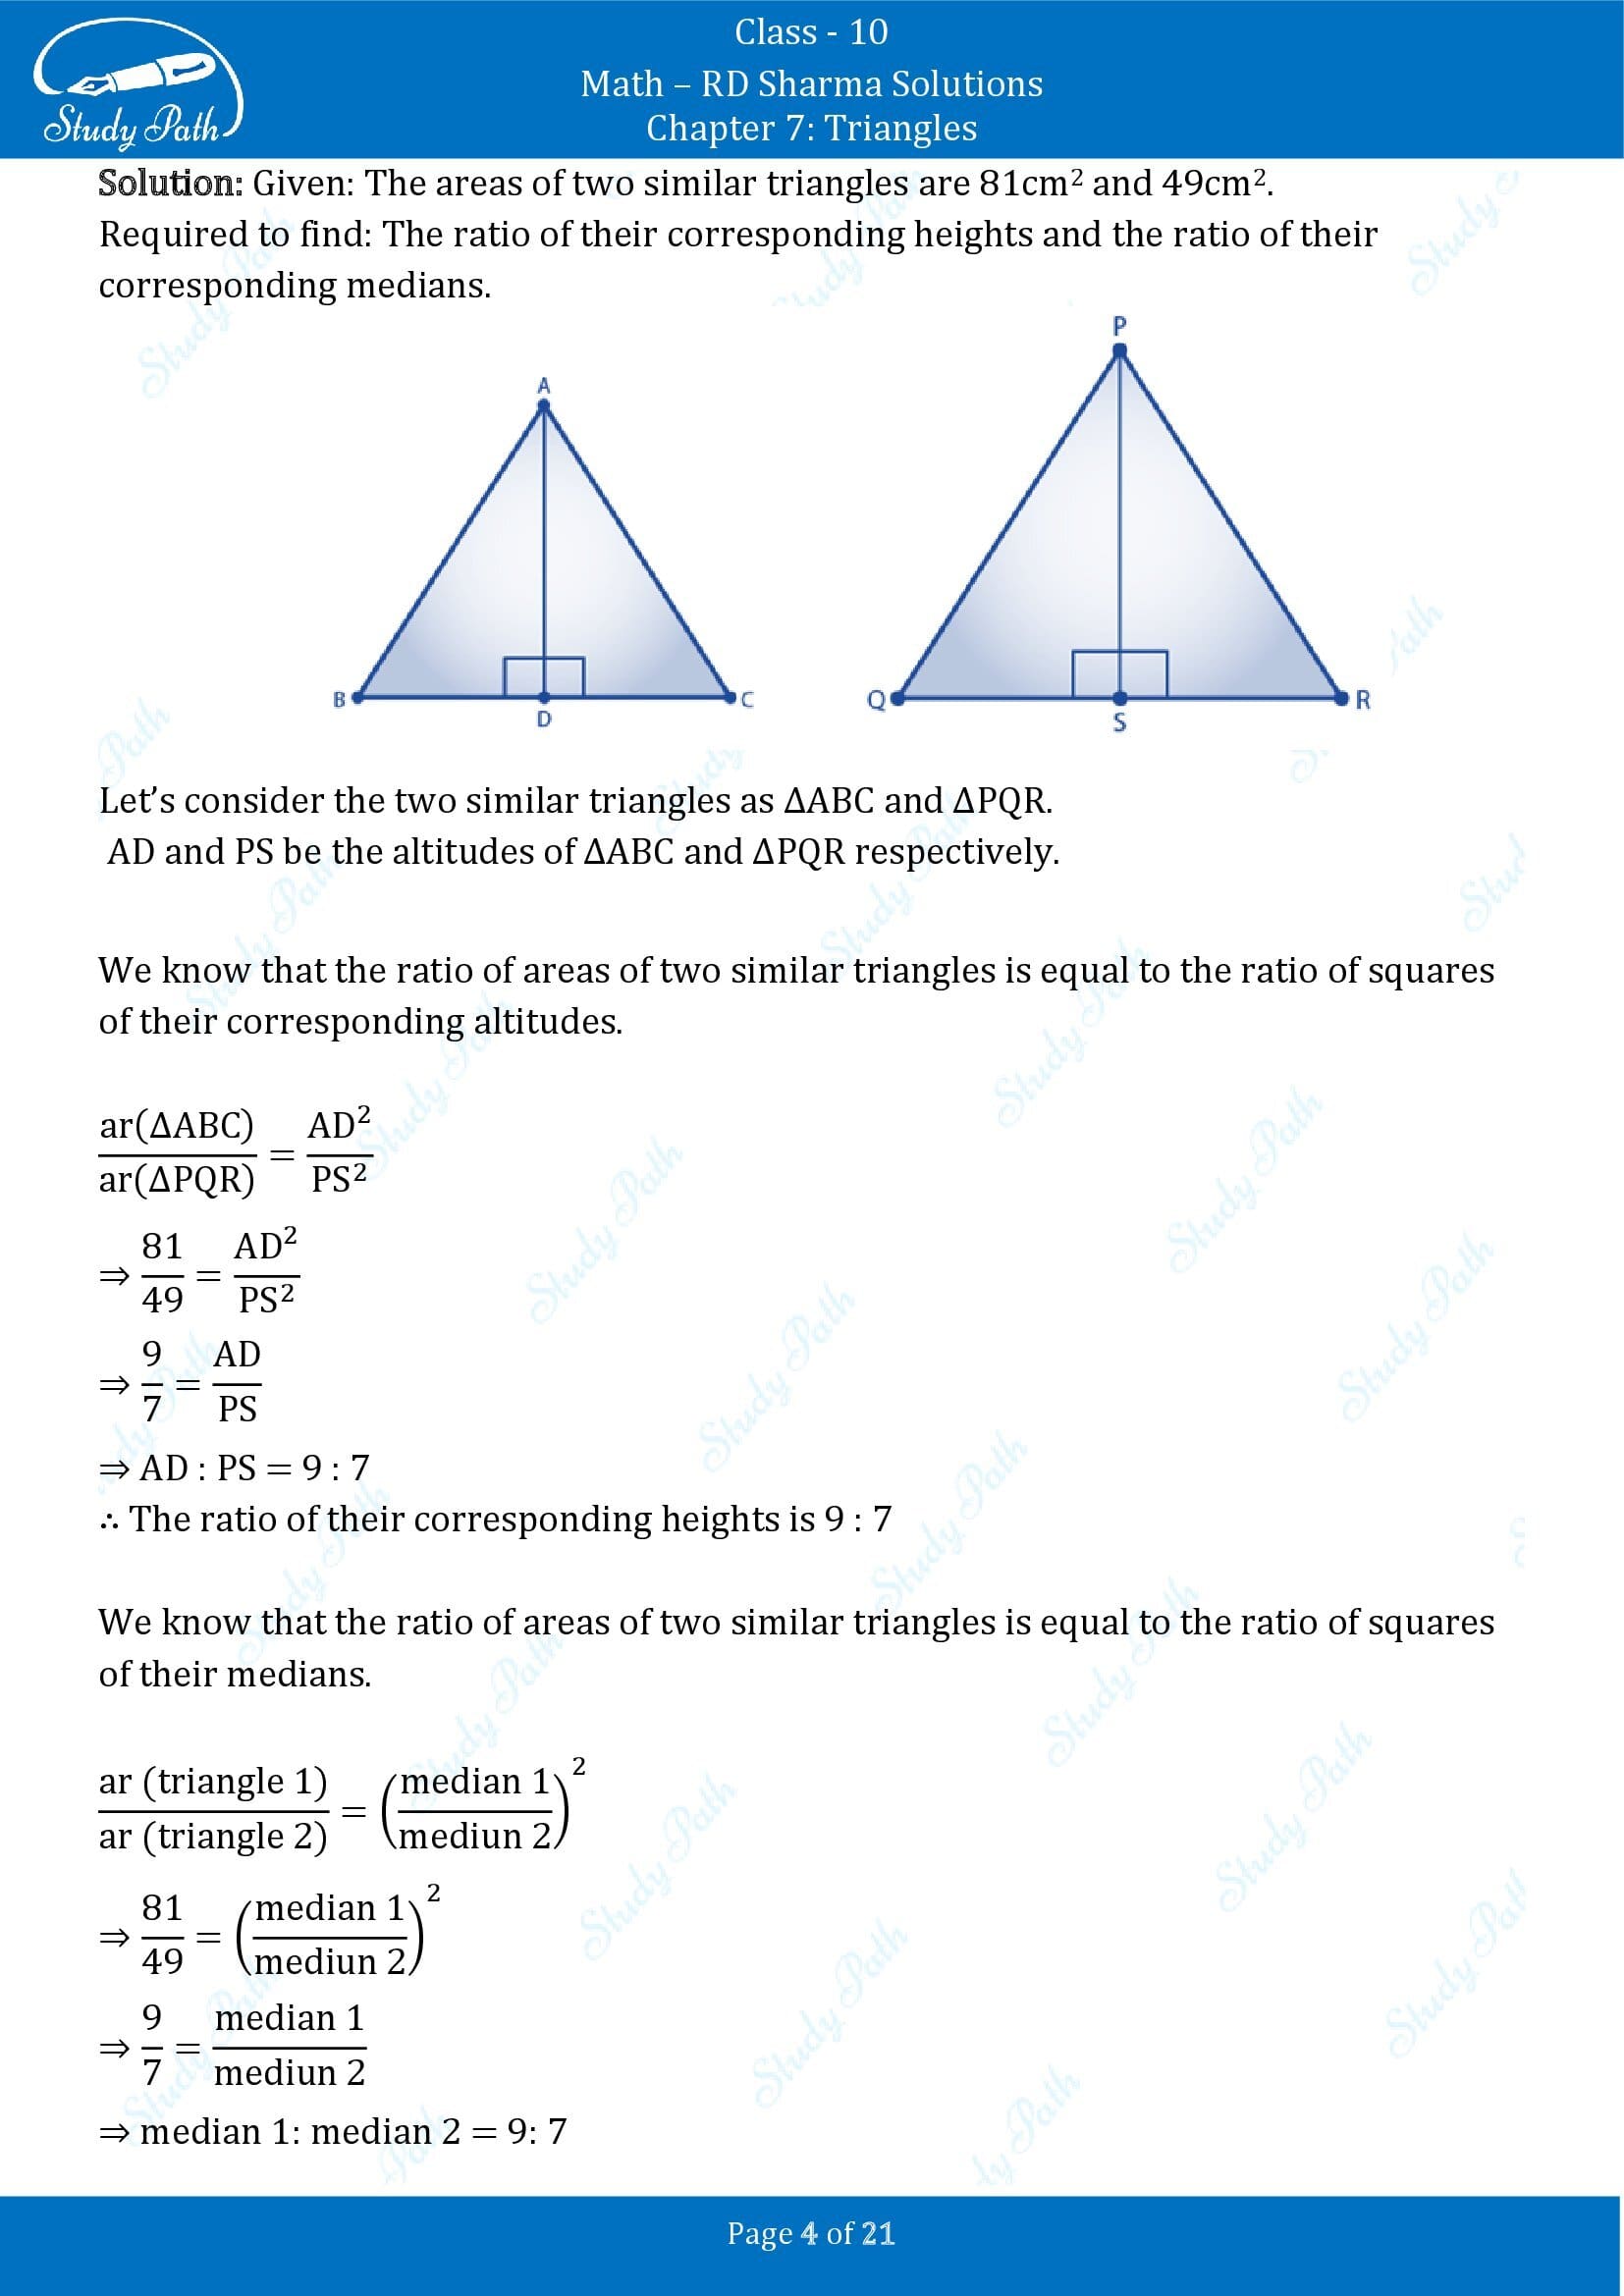 RD Sharma Solutions Class 10 Chapter 7 Triangles Exercise 7.6 00004